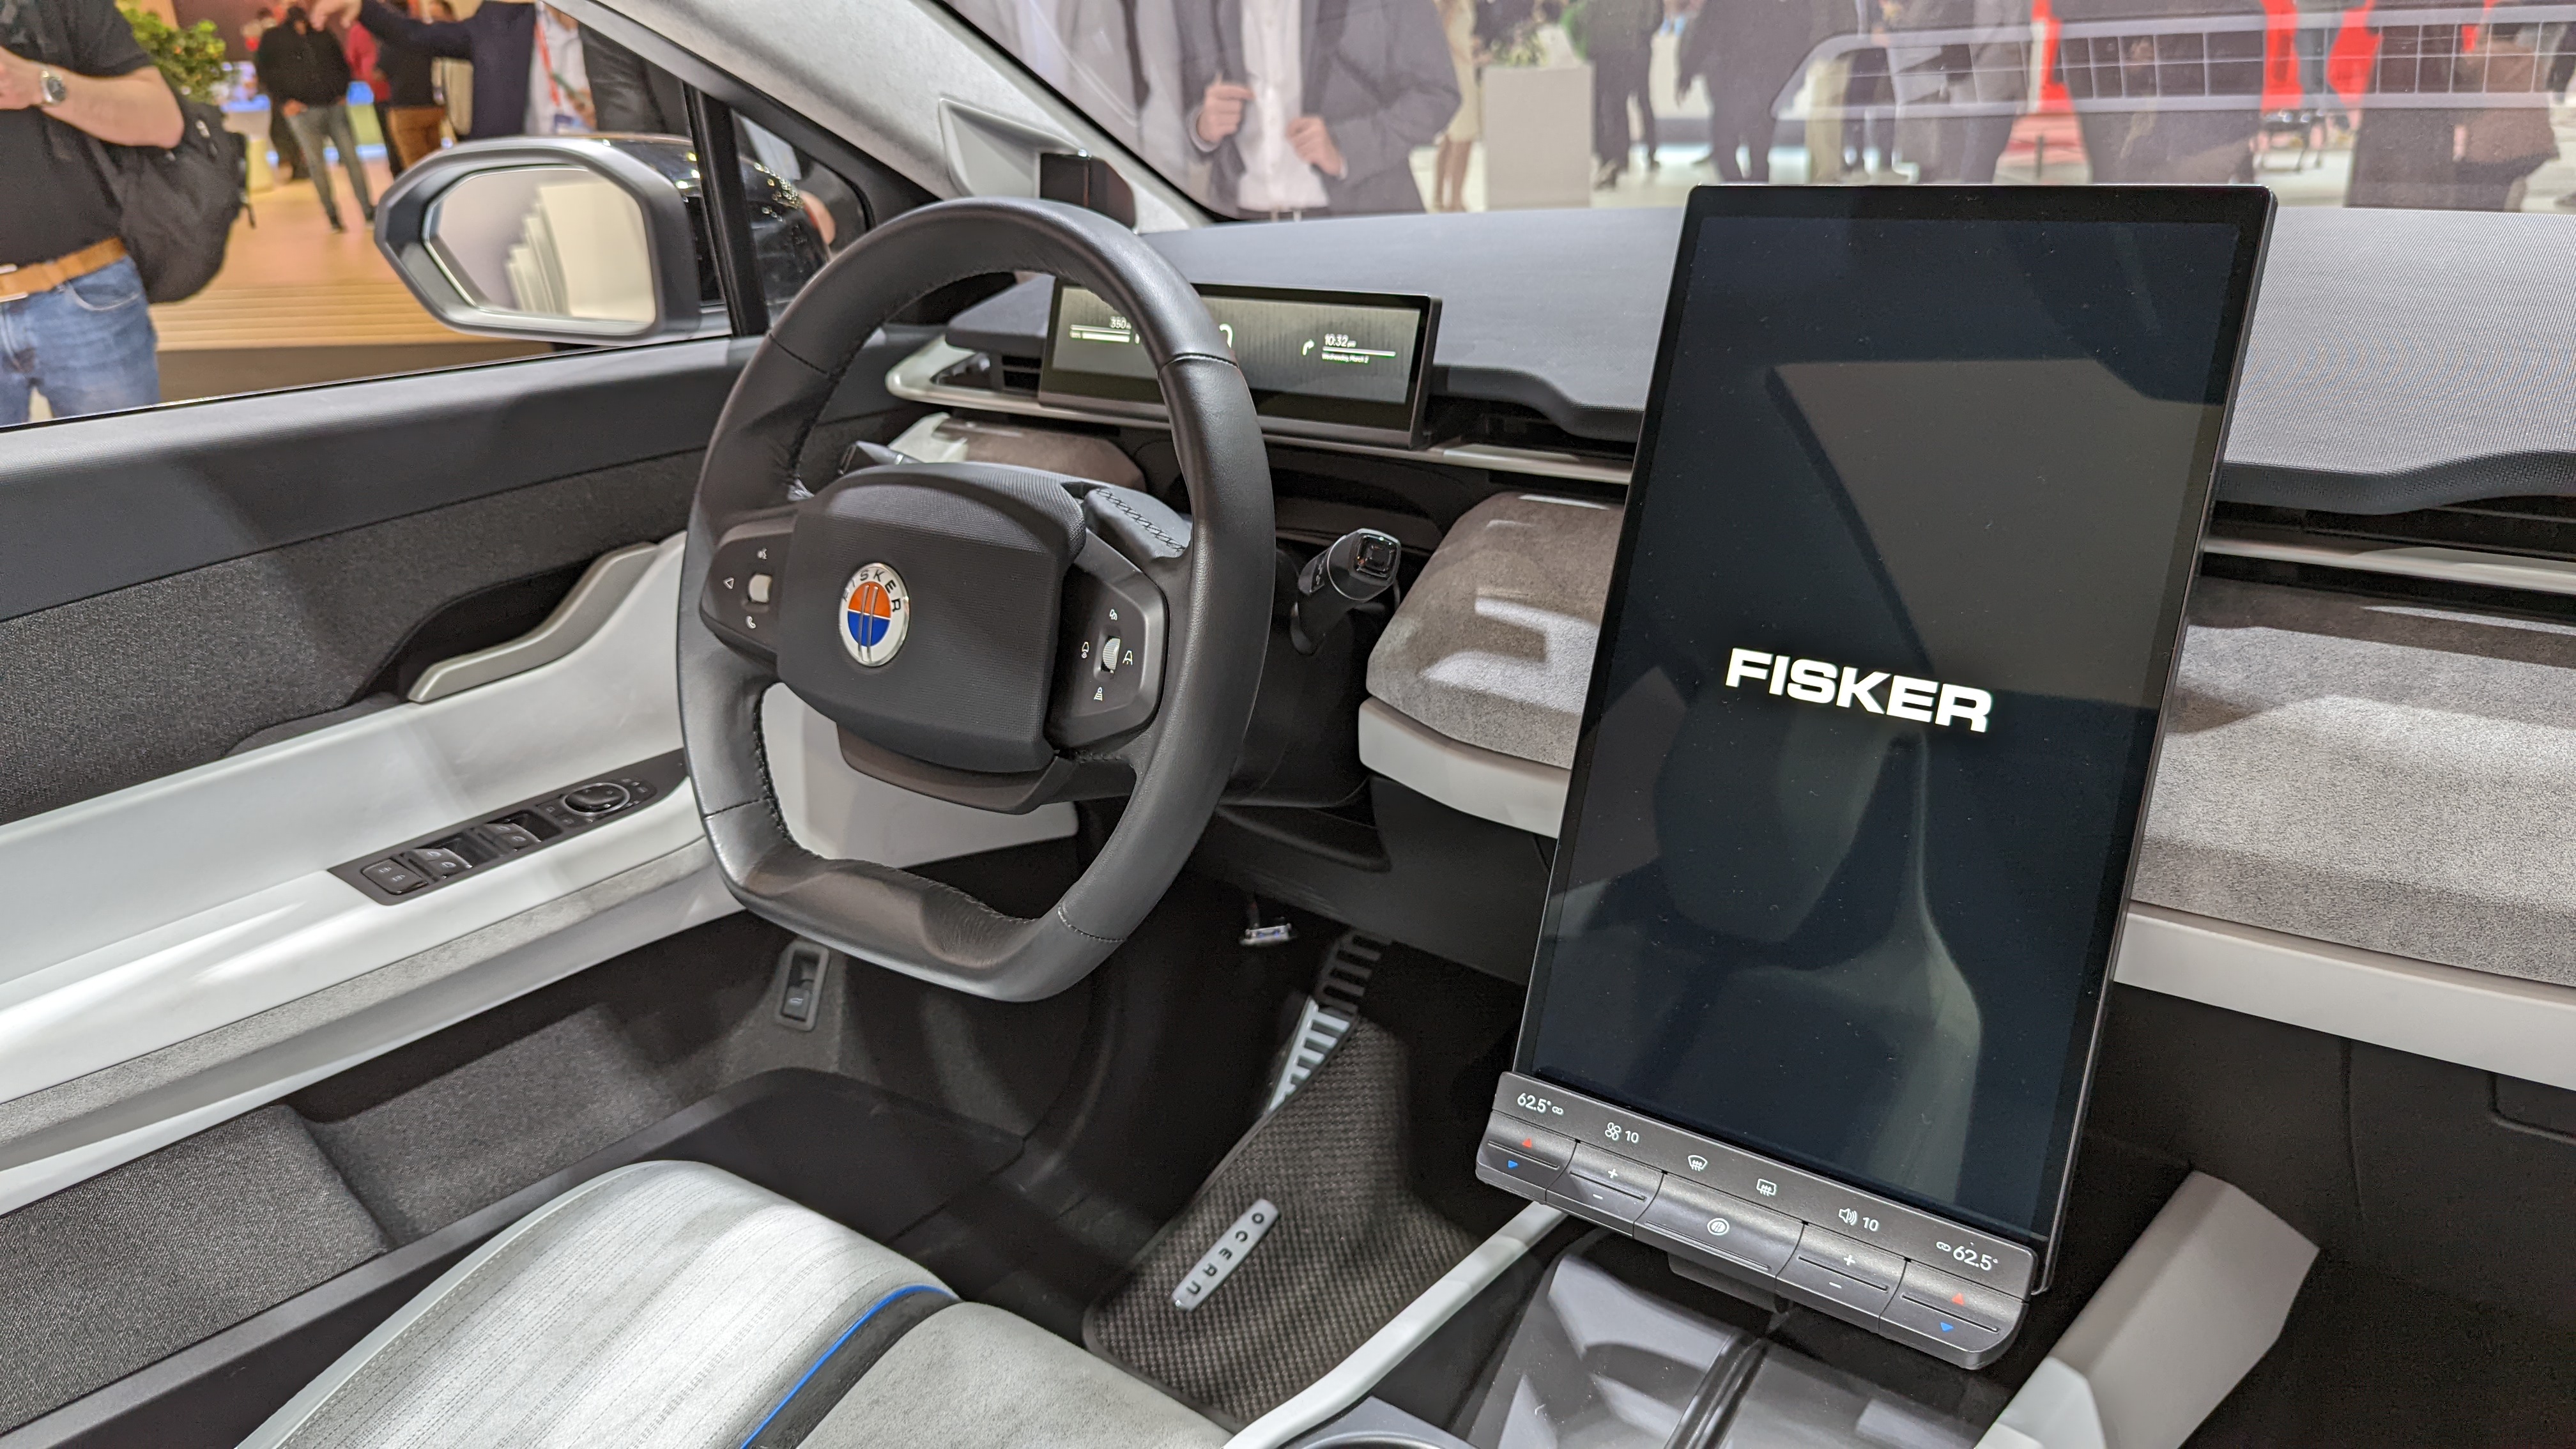 Steering wheel and portrait central screen